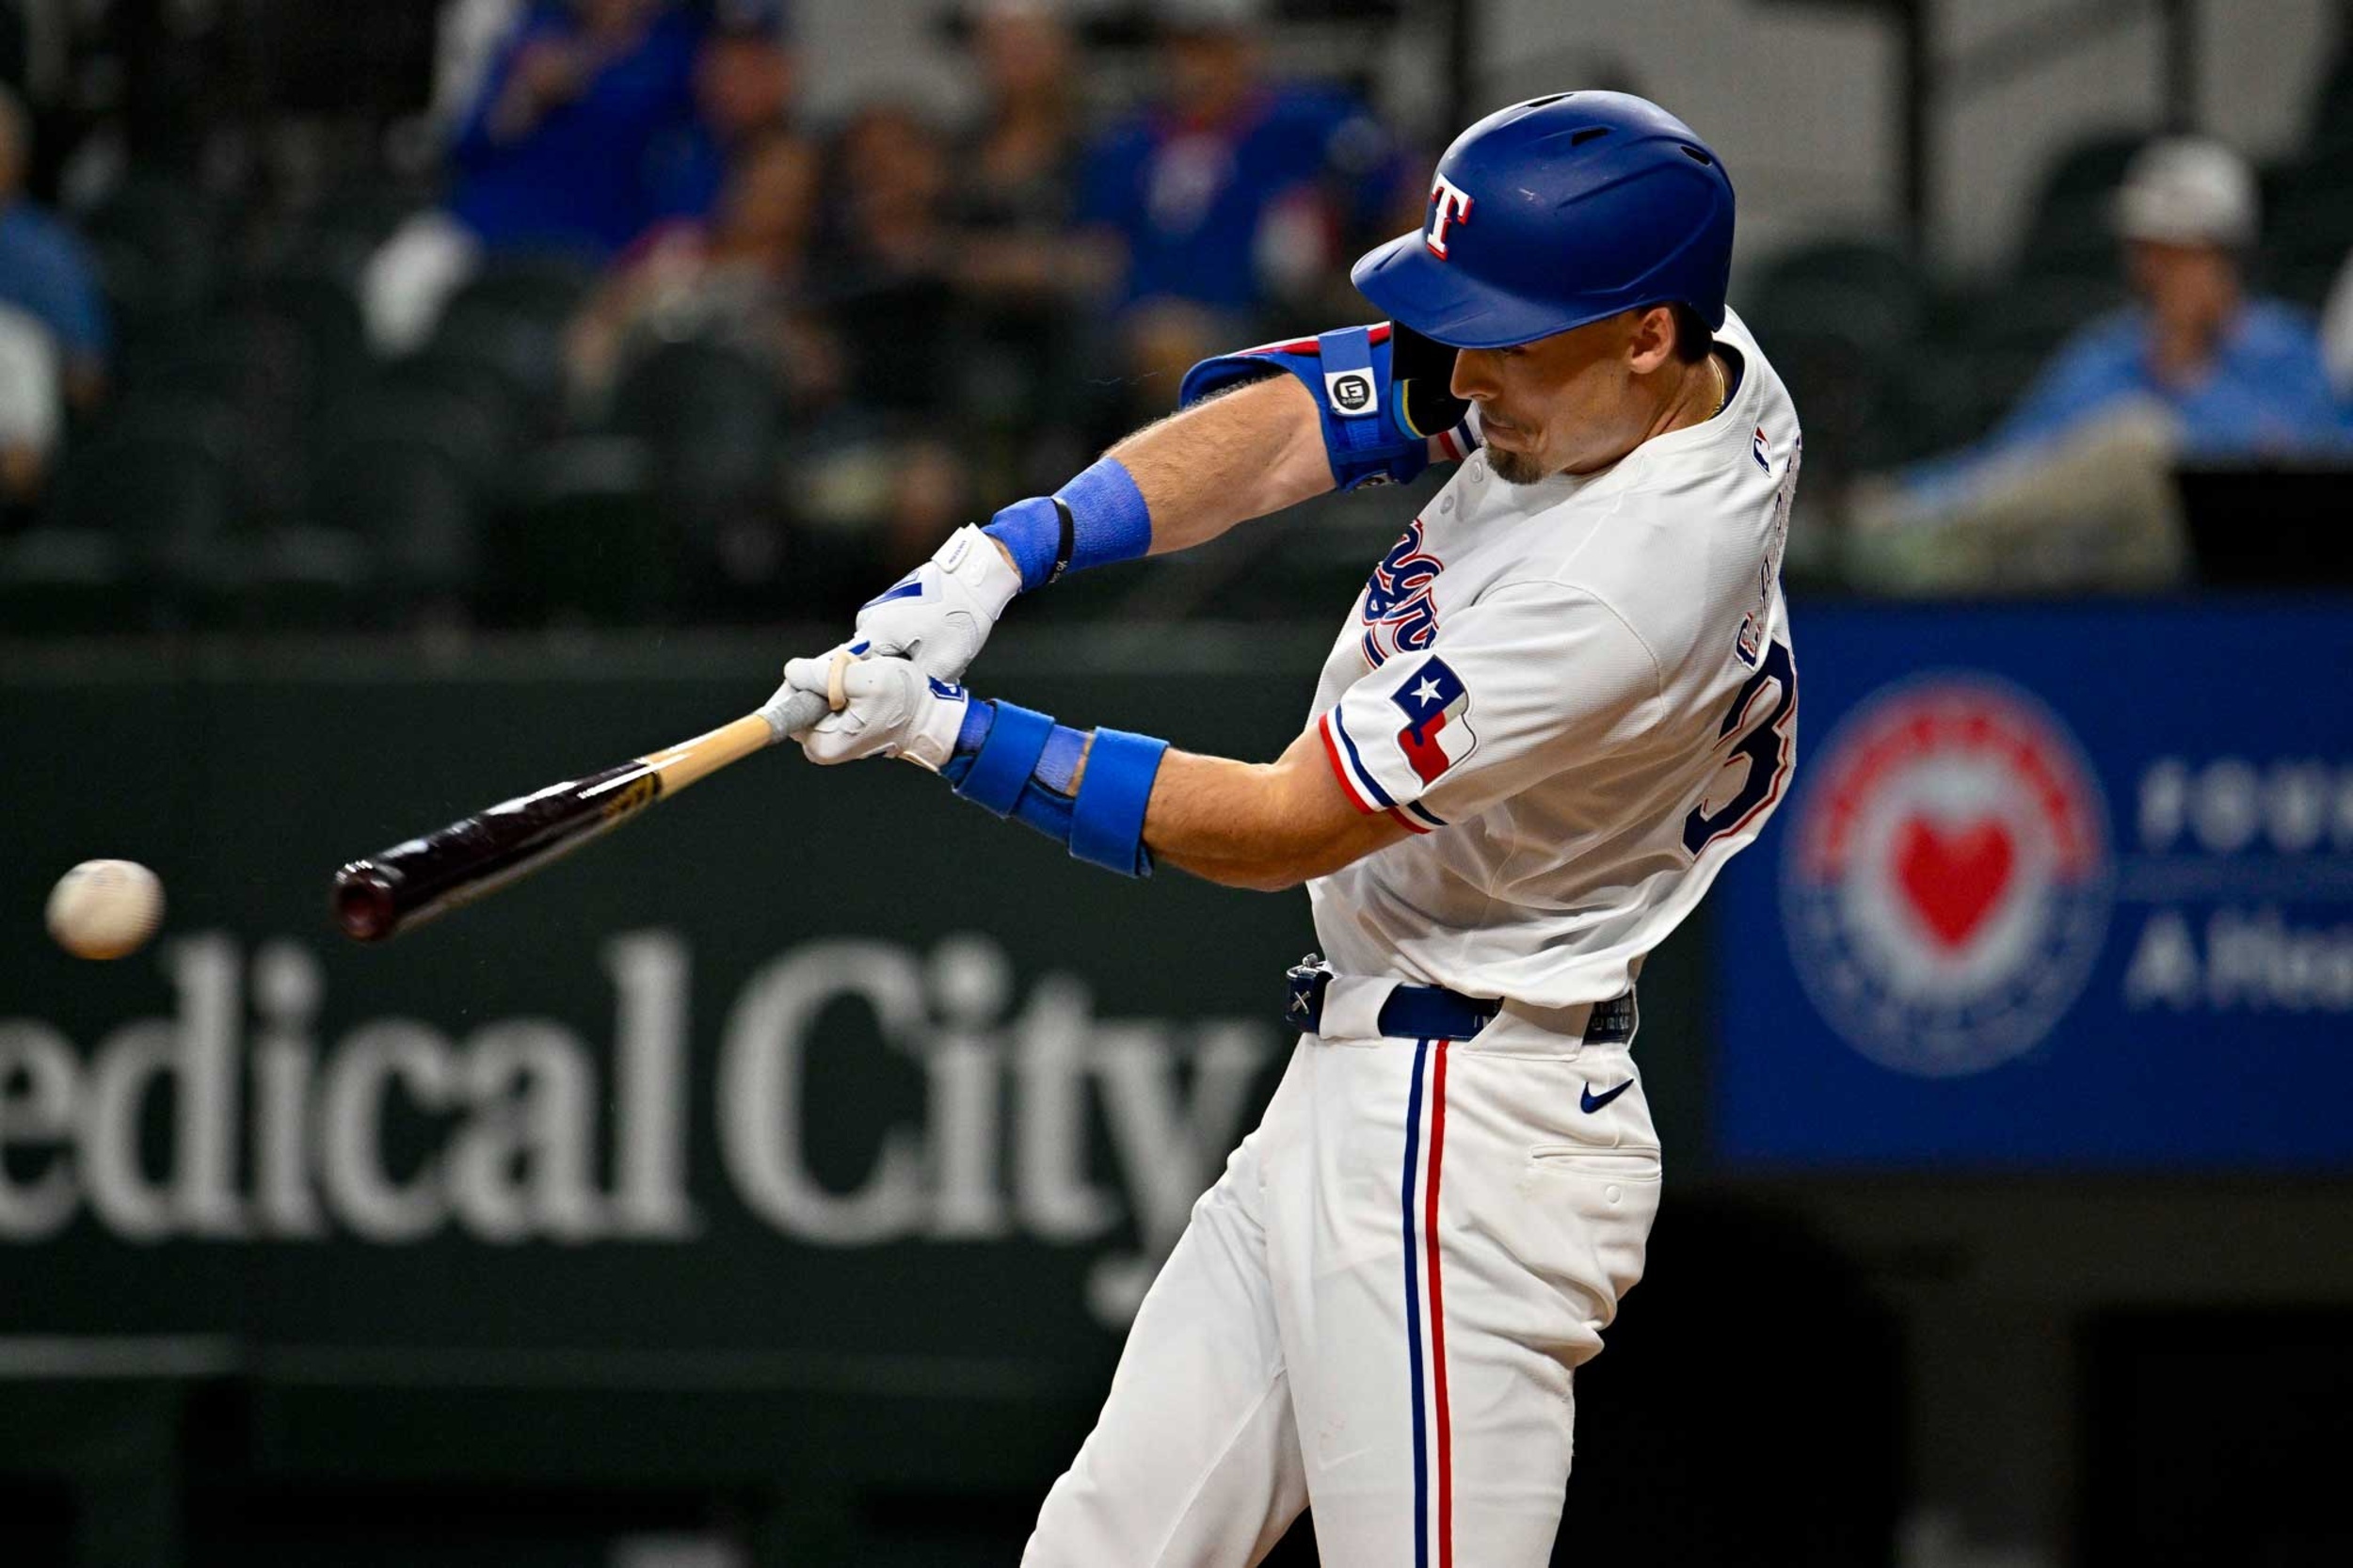 <p>Carter was a revelation for the Rangers in September and the playoffs, but never got his bat going this year. He hit .188-5-15 in 45 games before going on the IL with a back injury.</p><p><a href='https://www.msn.com/en-us/community/channel/vid-cj9pqbr0vn9in2b6ddcd8sfgpfq6x6utp44fssrv6mc2gtybw0us'>Follow us on MSN to see more of our exclusive MLB content.</a></p>